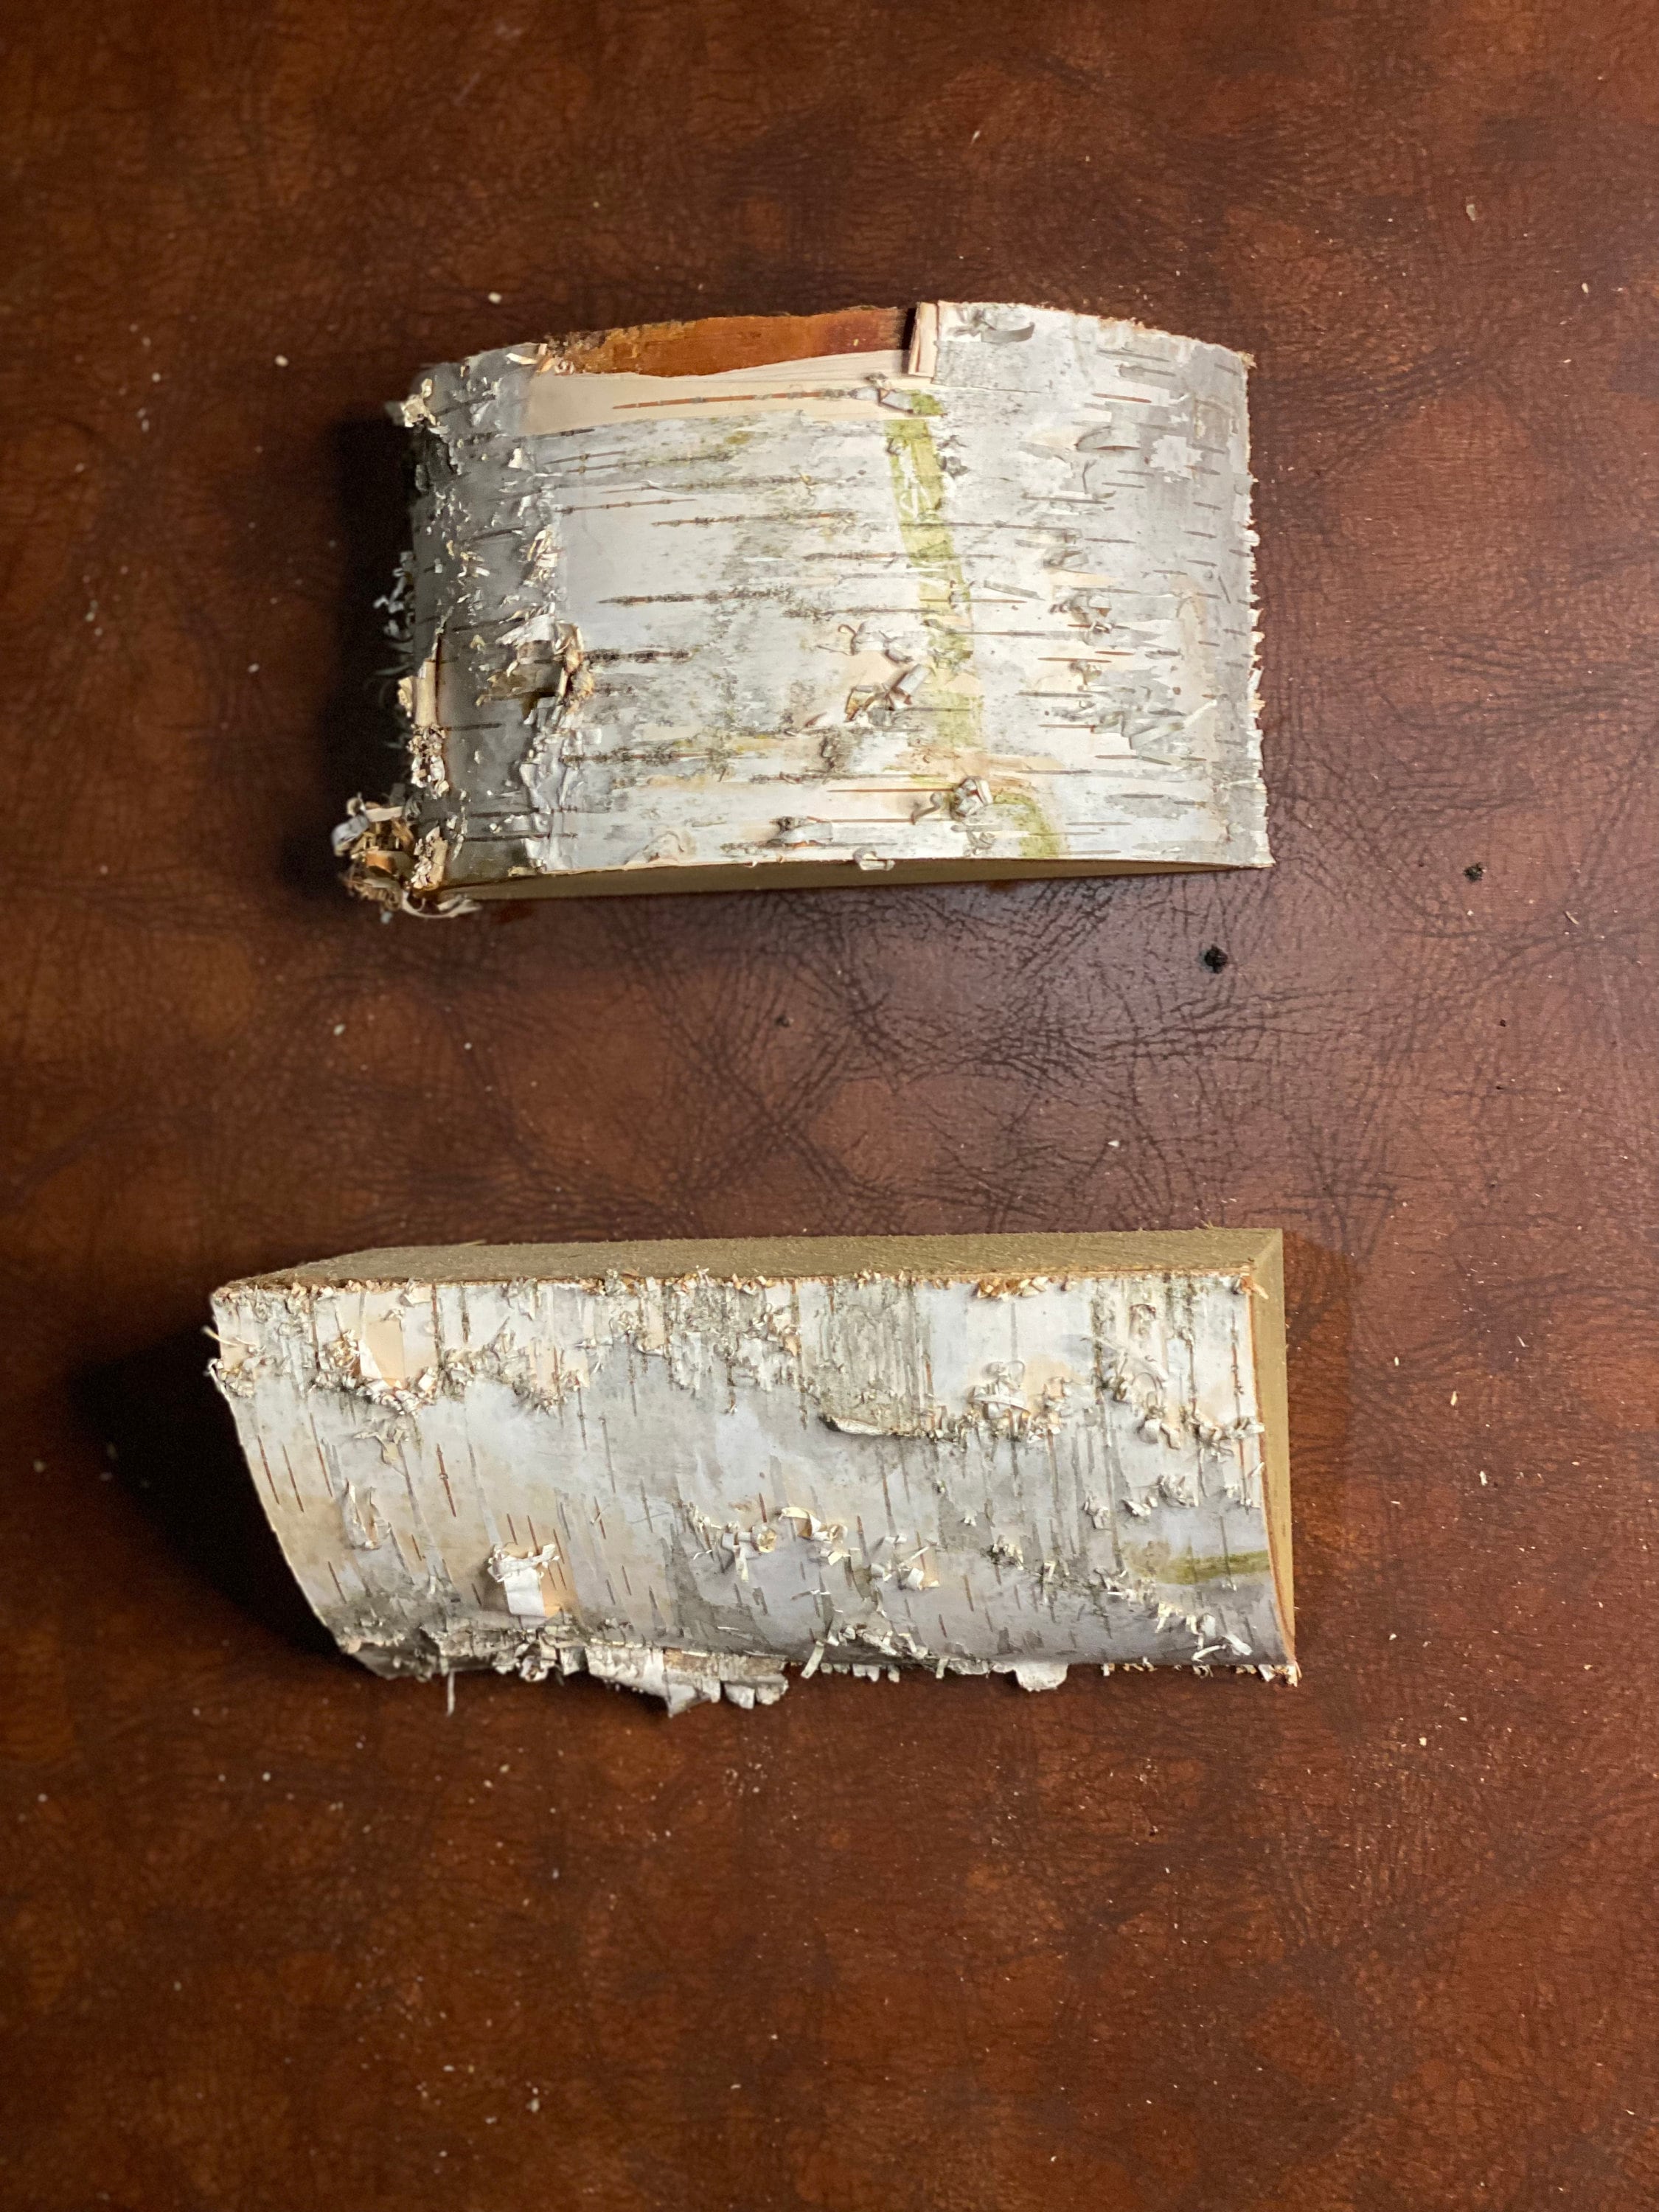 White Birch Wedges, Approximately 7-8 Inches Long by 4 Inches Wide and 3.5 Inches Tall